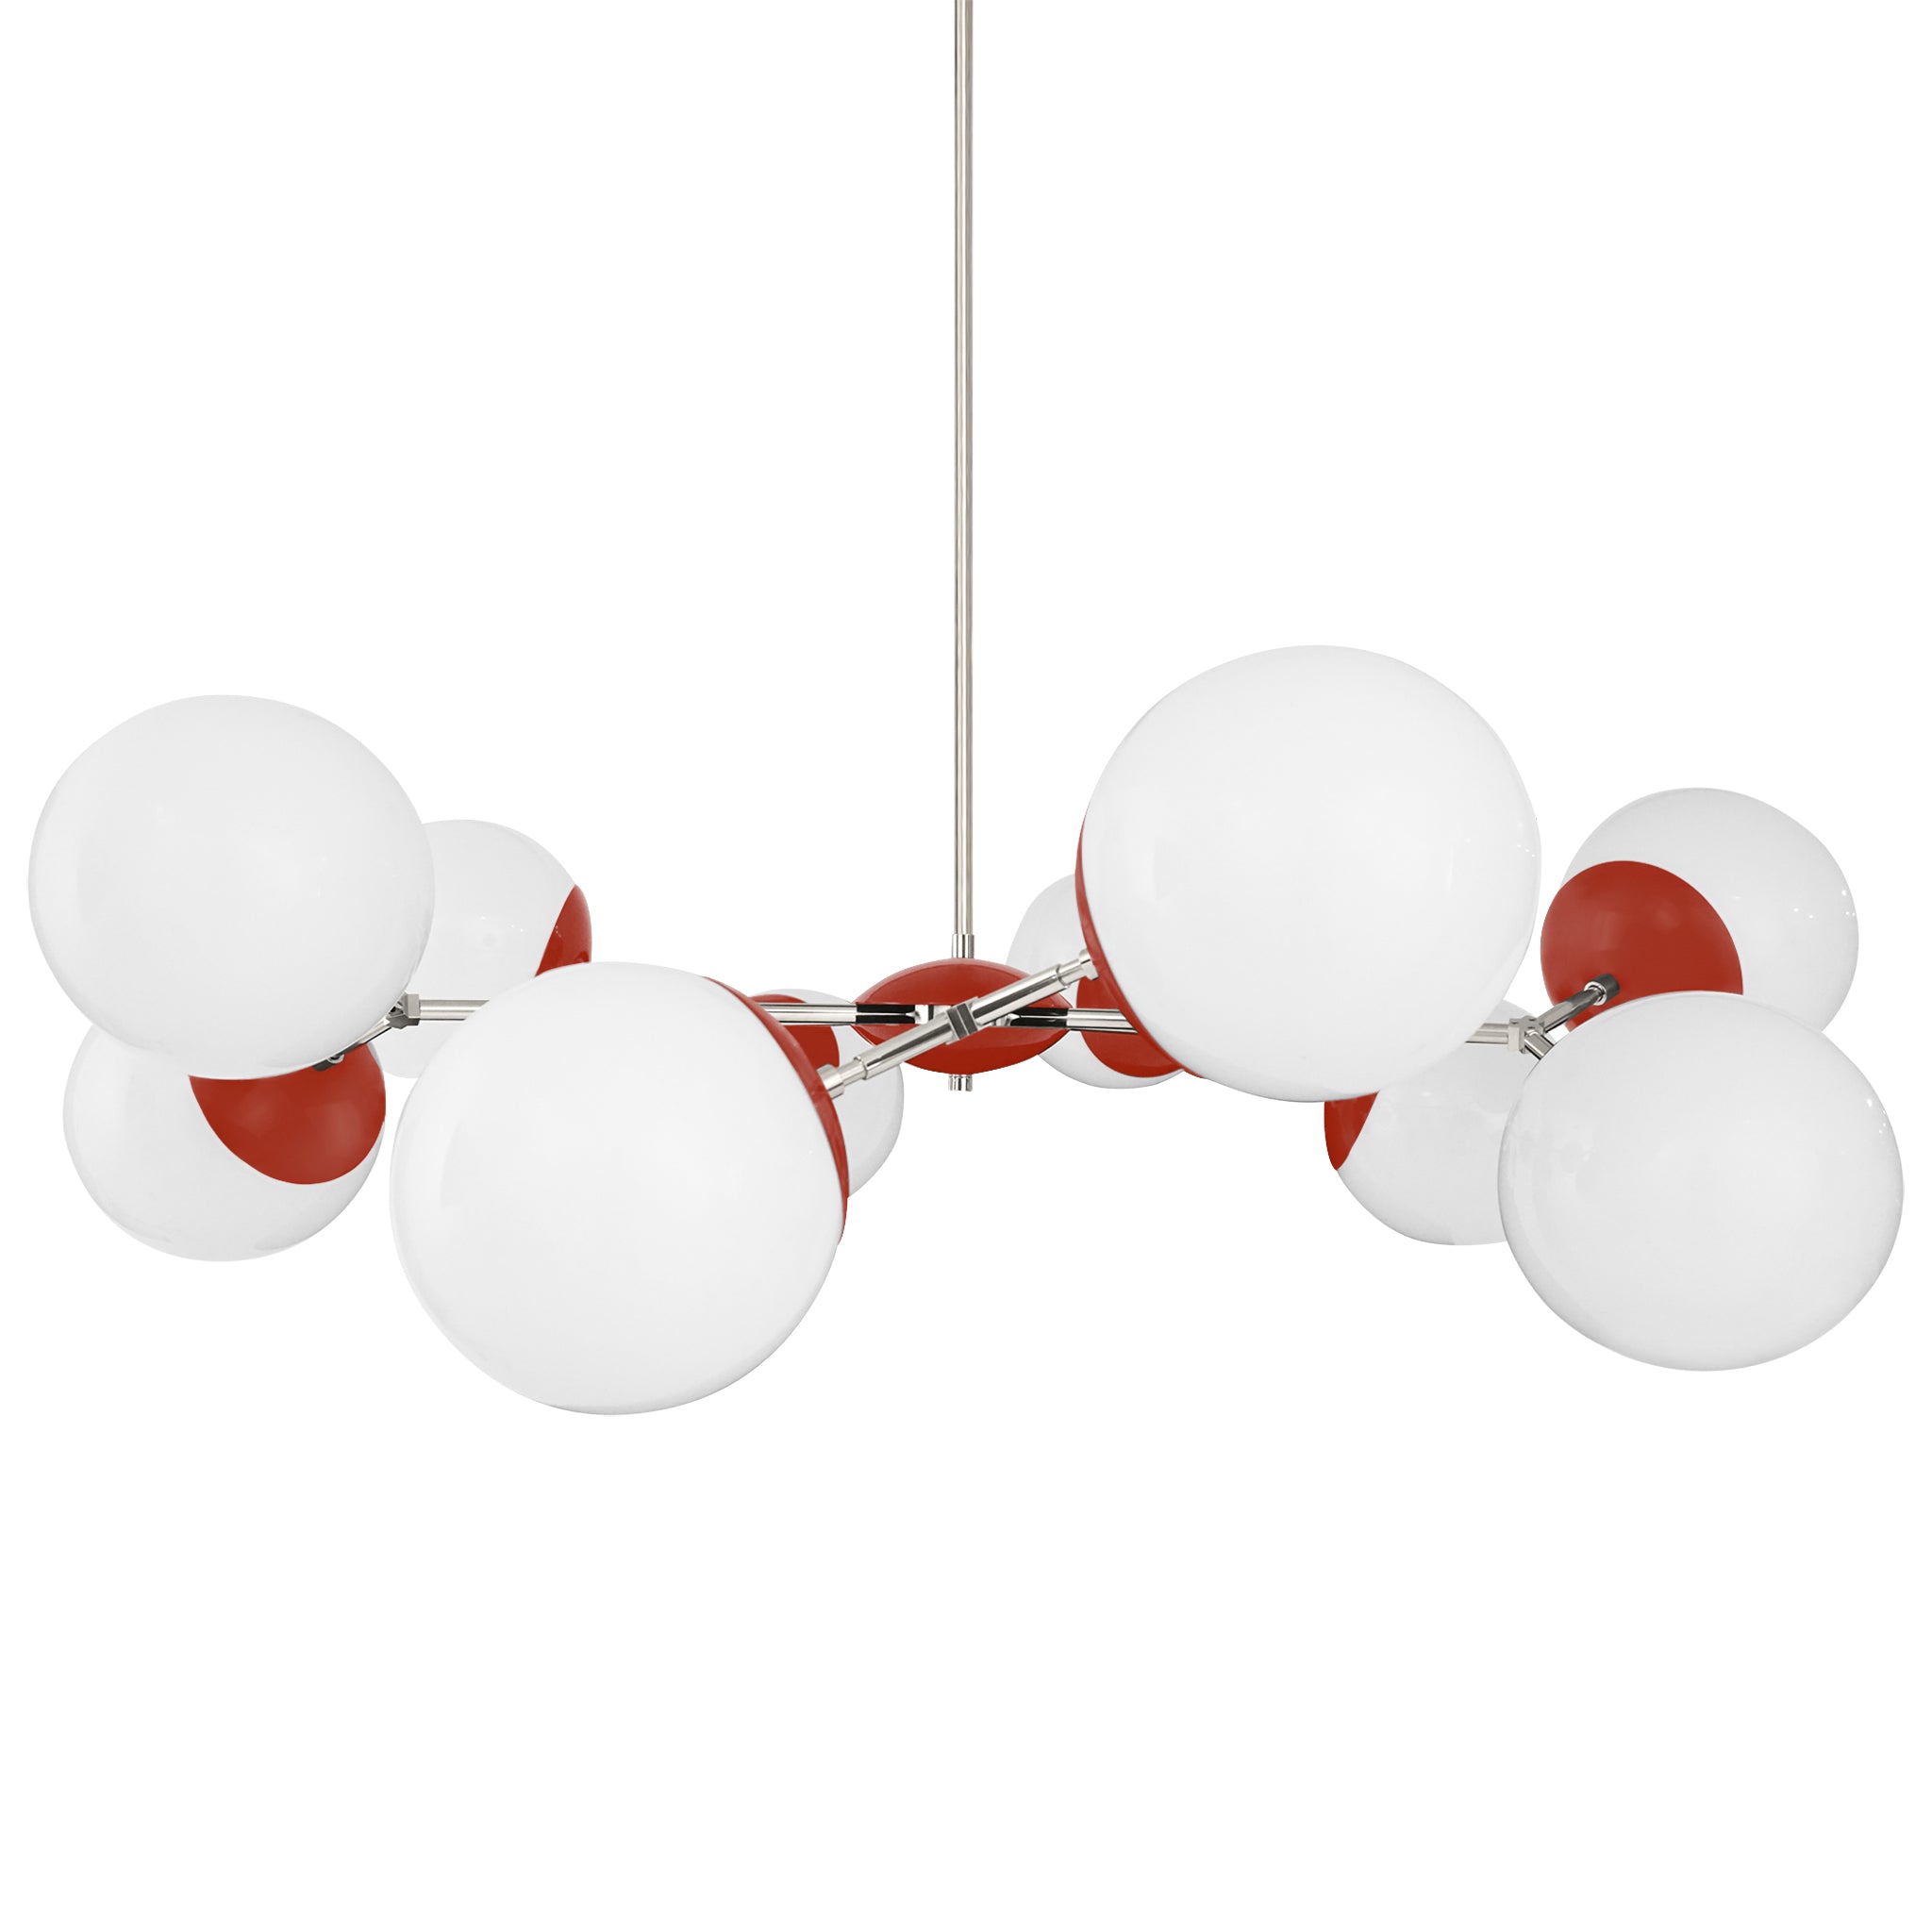 Nickel and riding hood red color Crown chandelier 46" Dutton Brown lighting